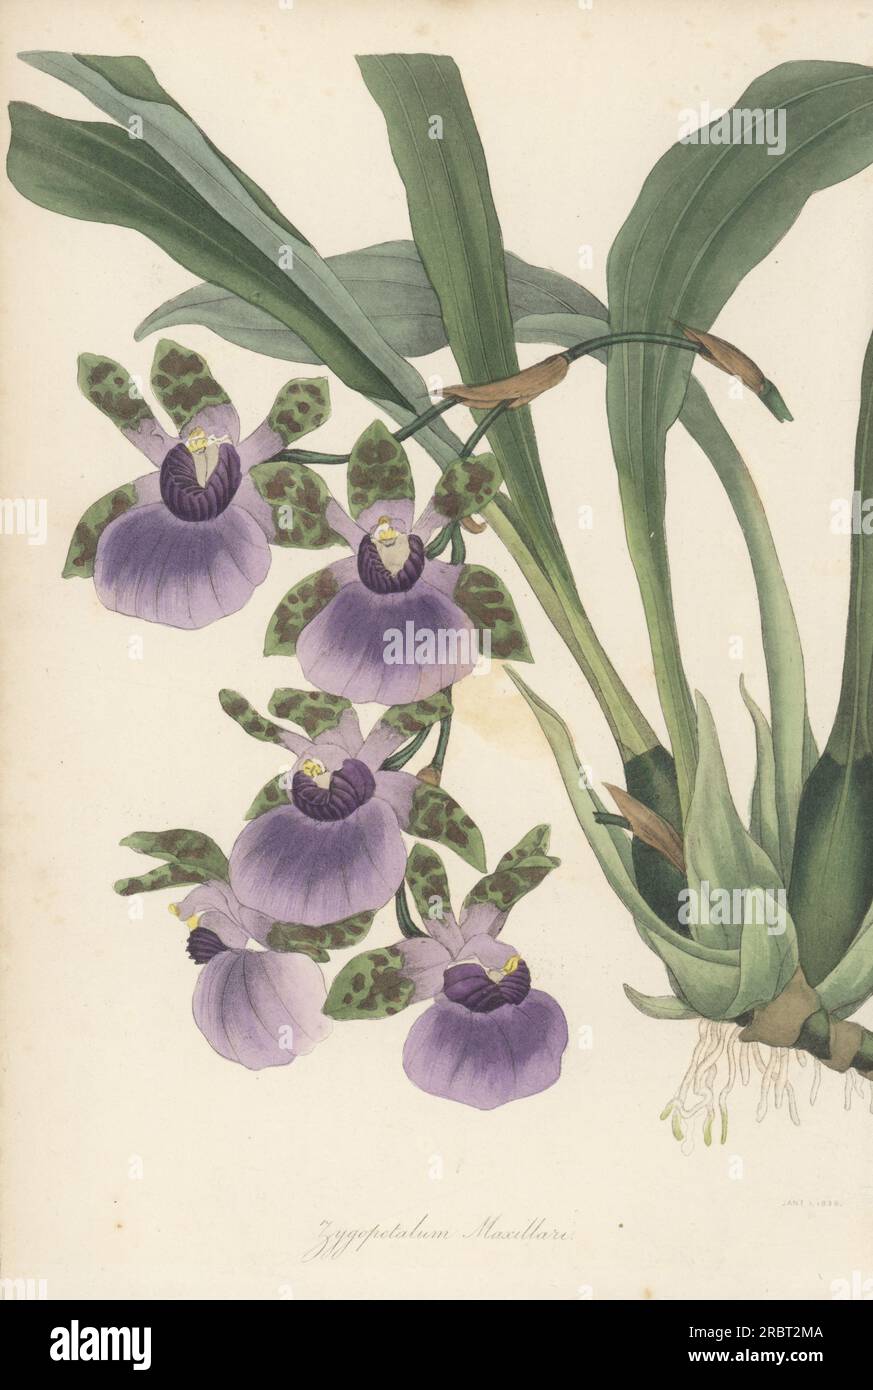 Tooth-like flowered zygopetalum orchid, Zygopetalum maxillare. Native to Brazil, Paraguay and Argentina, sent by F. Warre from Rio de Janeiro to nurseryman George Loddiges in Hackney. Handcoloured engraving from Joseph Paxton’s Magazine of Botany, and Register of Flowering Plants, Volume 4, Orr and Smith, London, 1837. Stock Photo